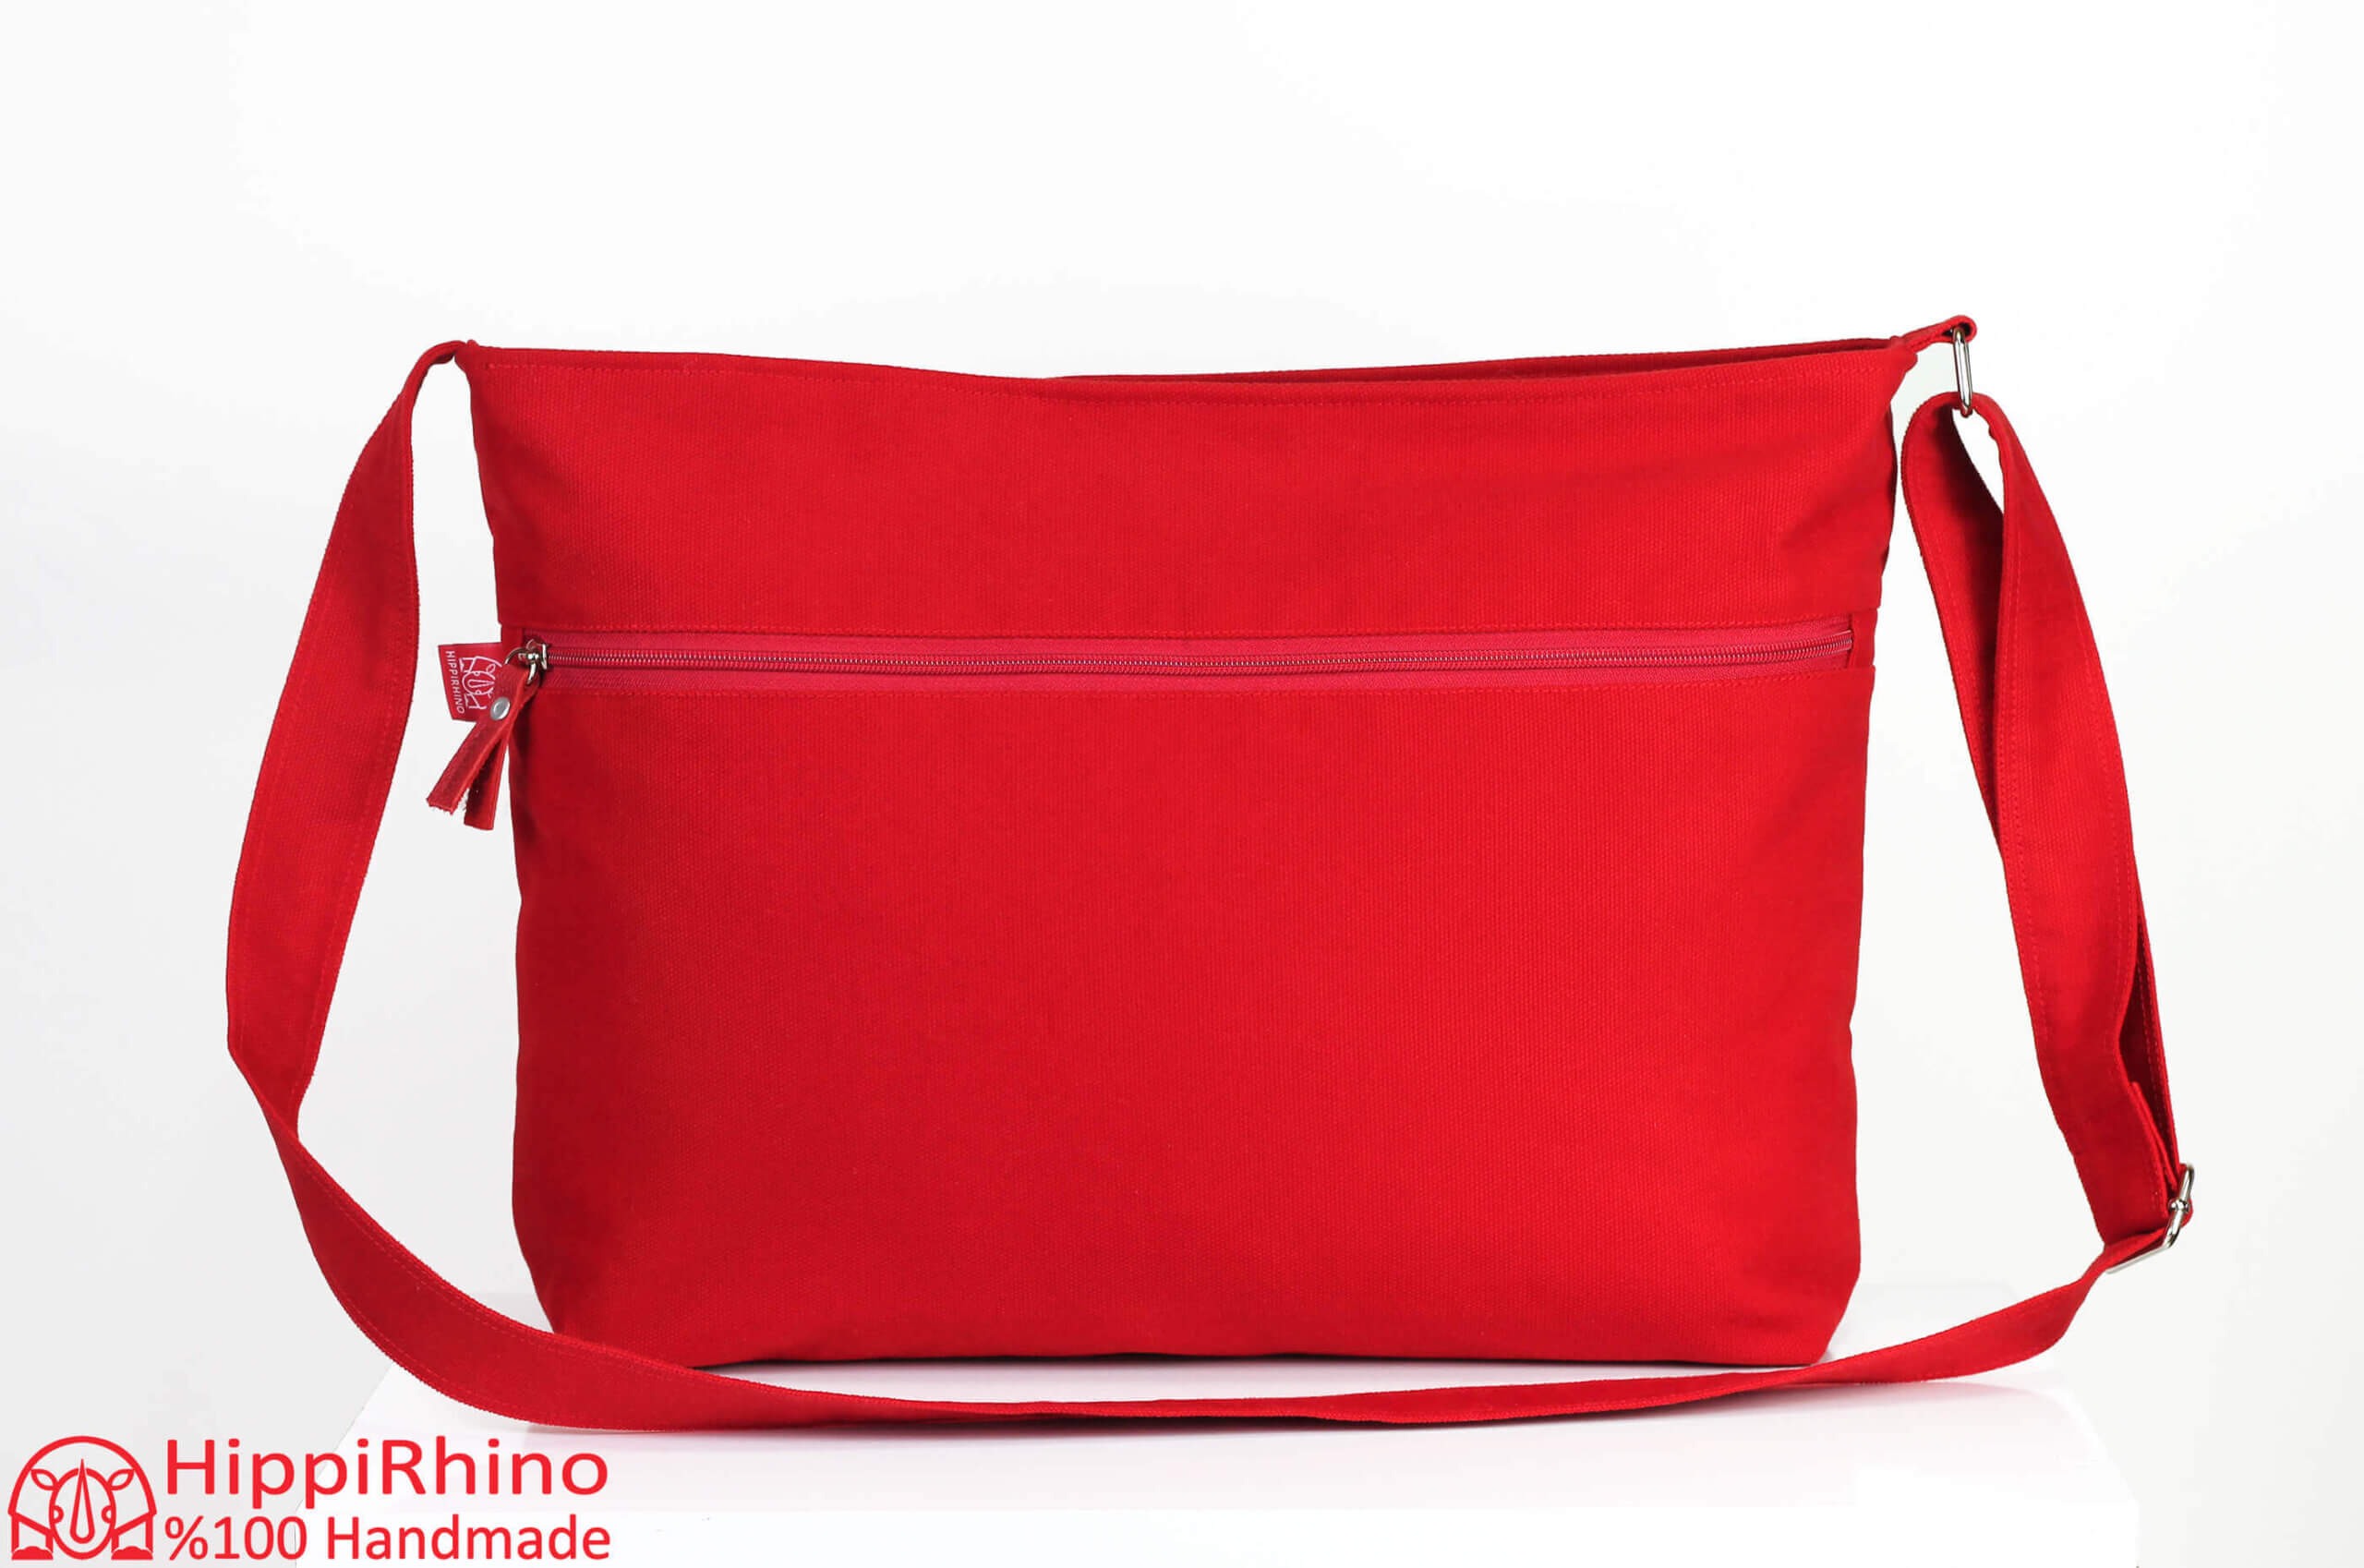 Red Canvas Messenger Bag Canvas Tote Bag Classic Style Large Bag Shoulder Bag Men Bag Women Purse Unisex Casual Cotton Everyday Bag - Hippirhino Purses Totes Custom Personalized Handmade Bags